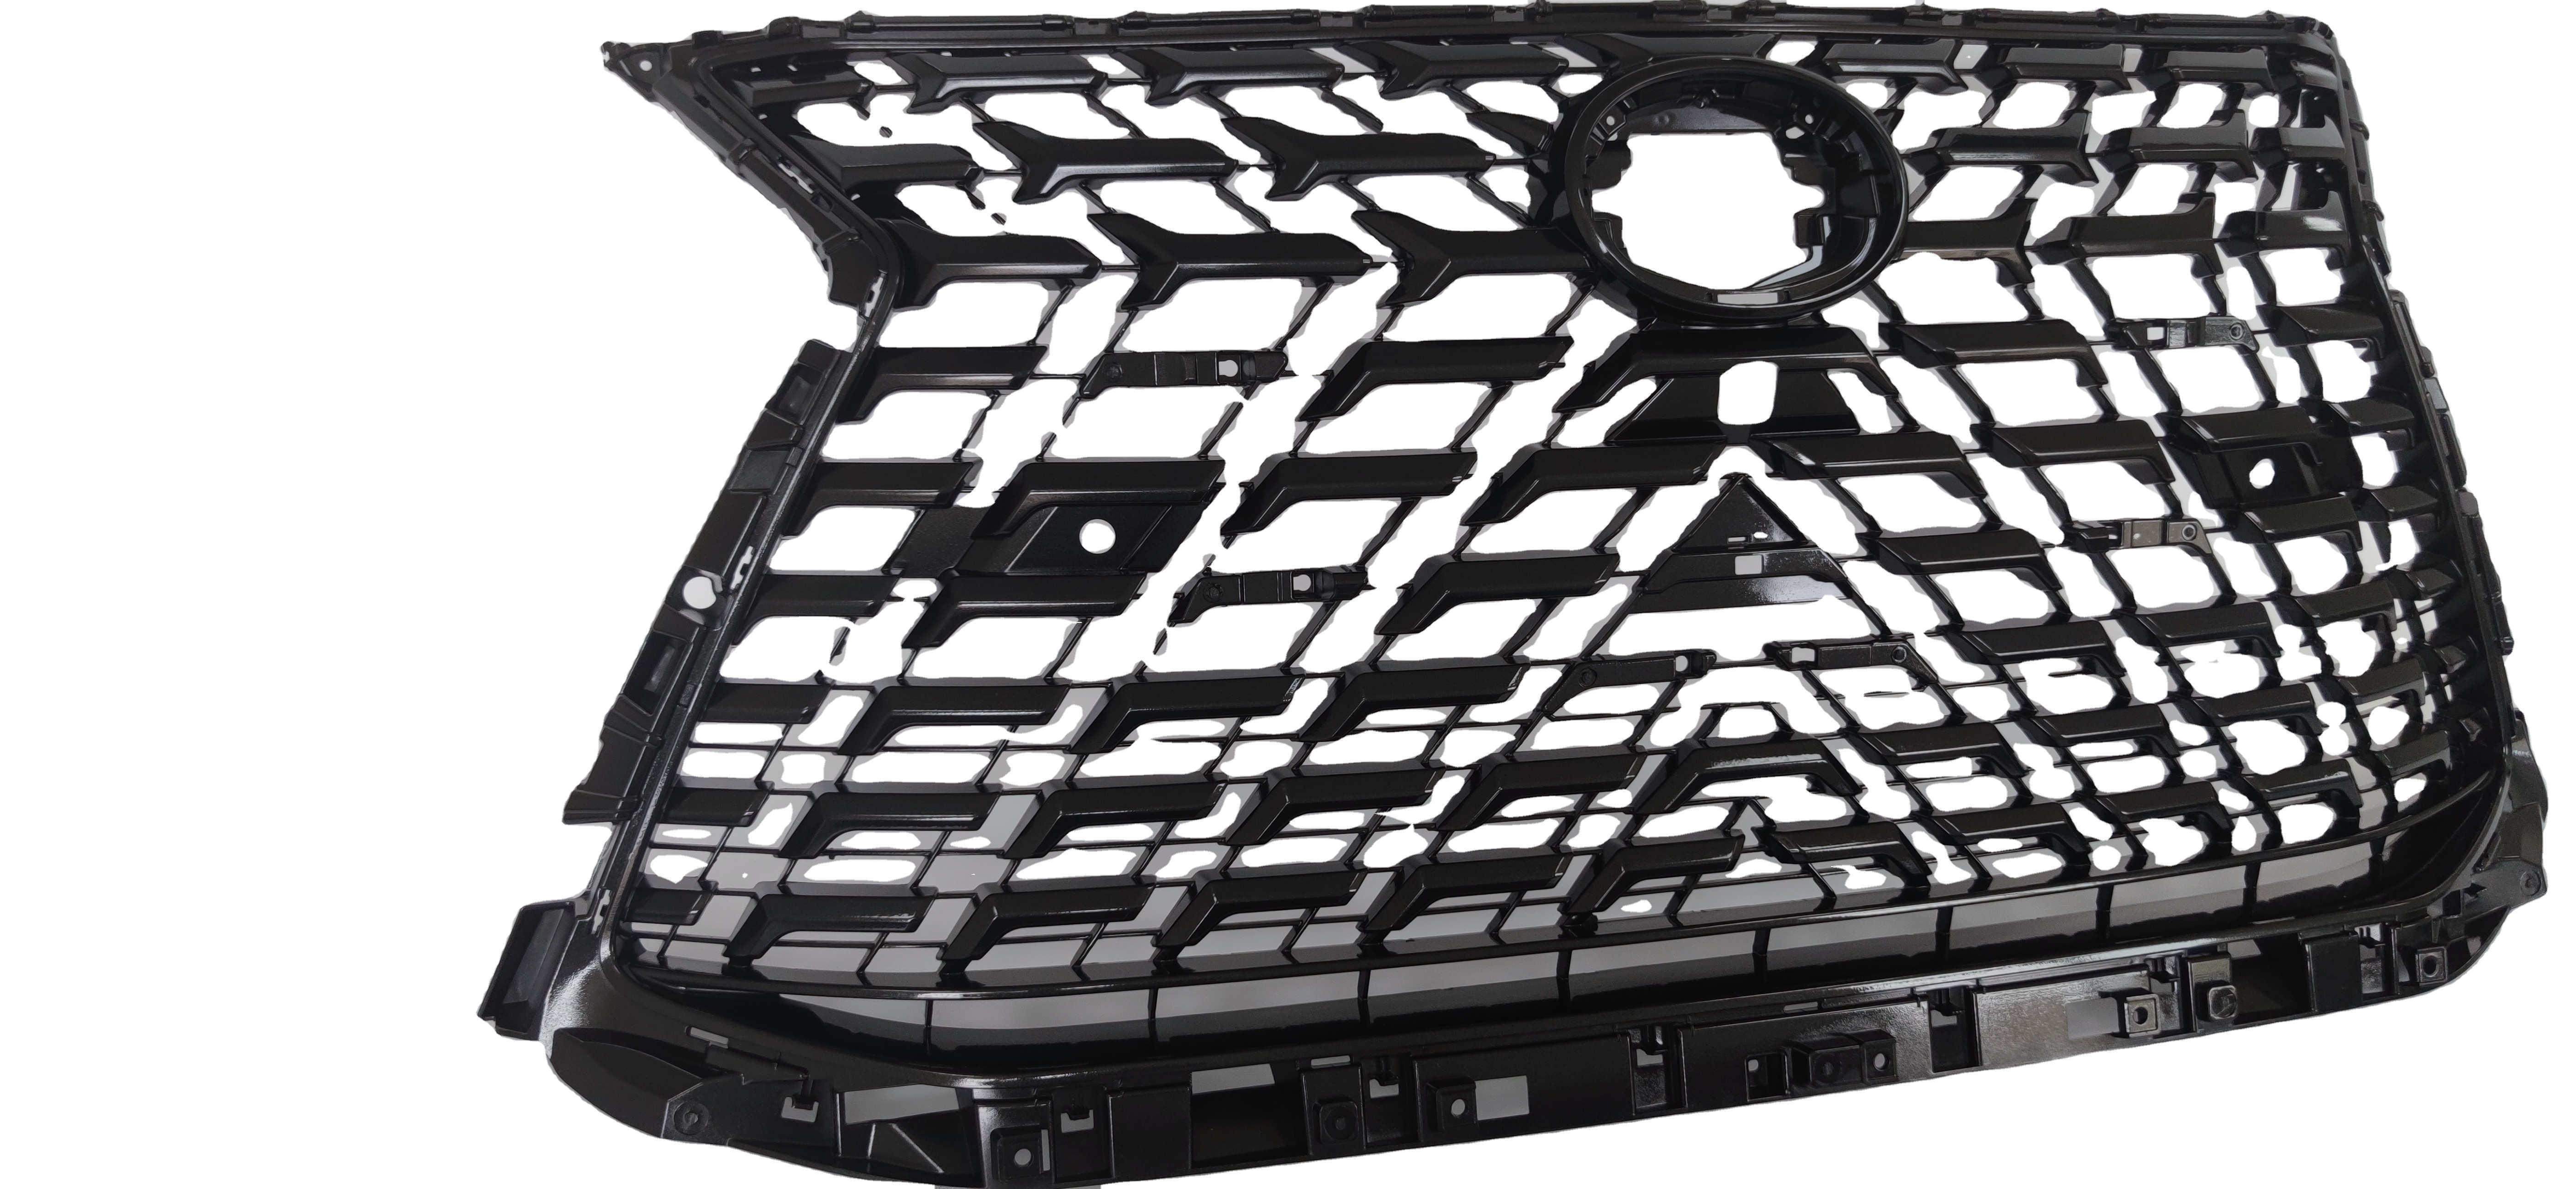 Plastic injection molded plastic | grille auto parts | modified parts